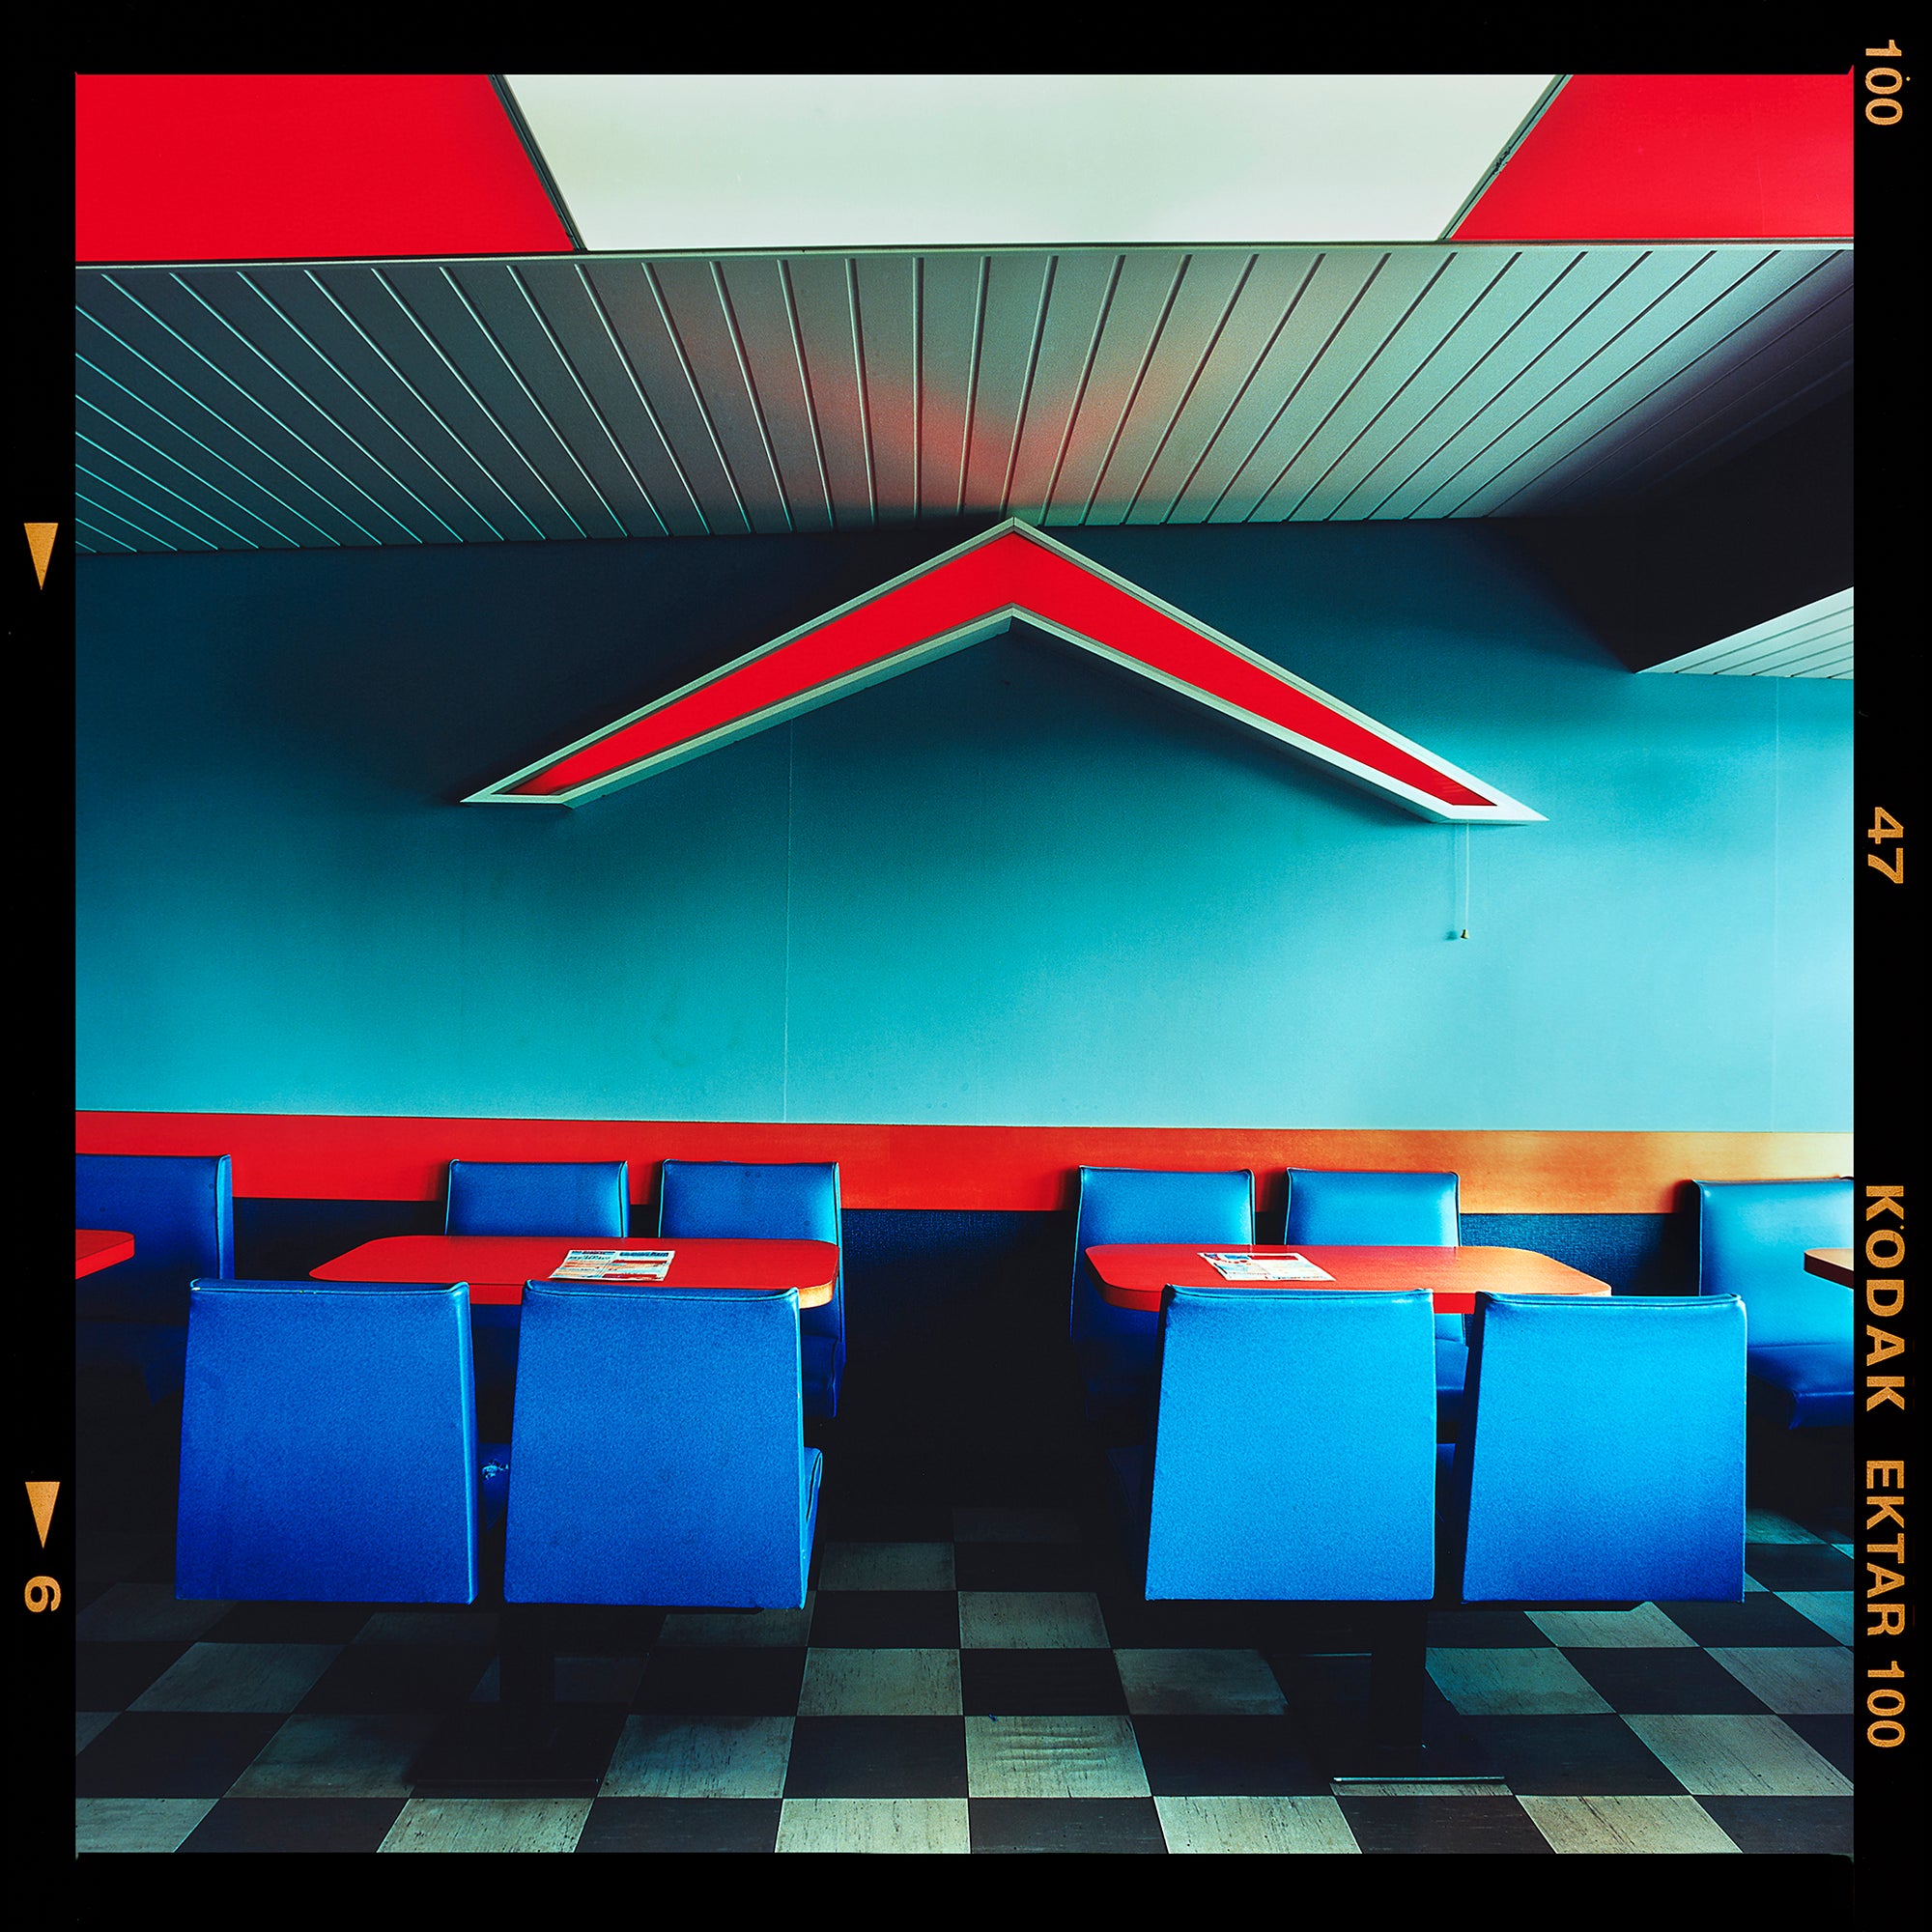 Photograph by Richard Heeps. This photograph captures the inside of a Wimpy Restaurant in Norfolk. There is bright blue seats and red tables. The walls are blue and there is a big red chevron light attached to the wall. 